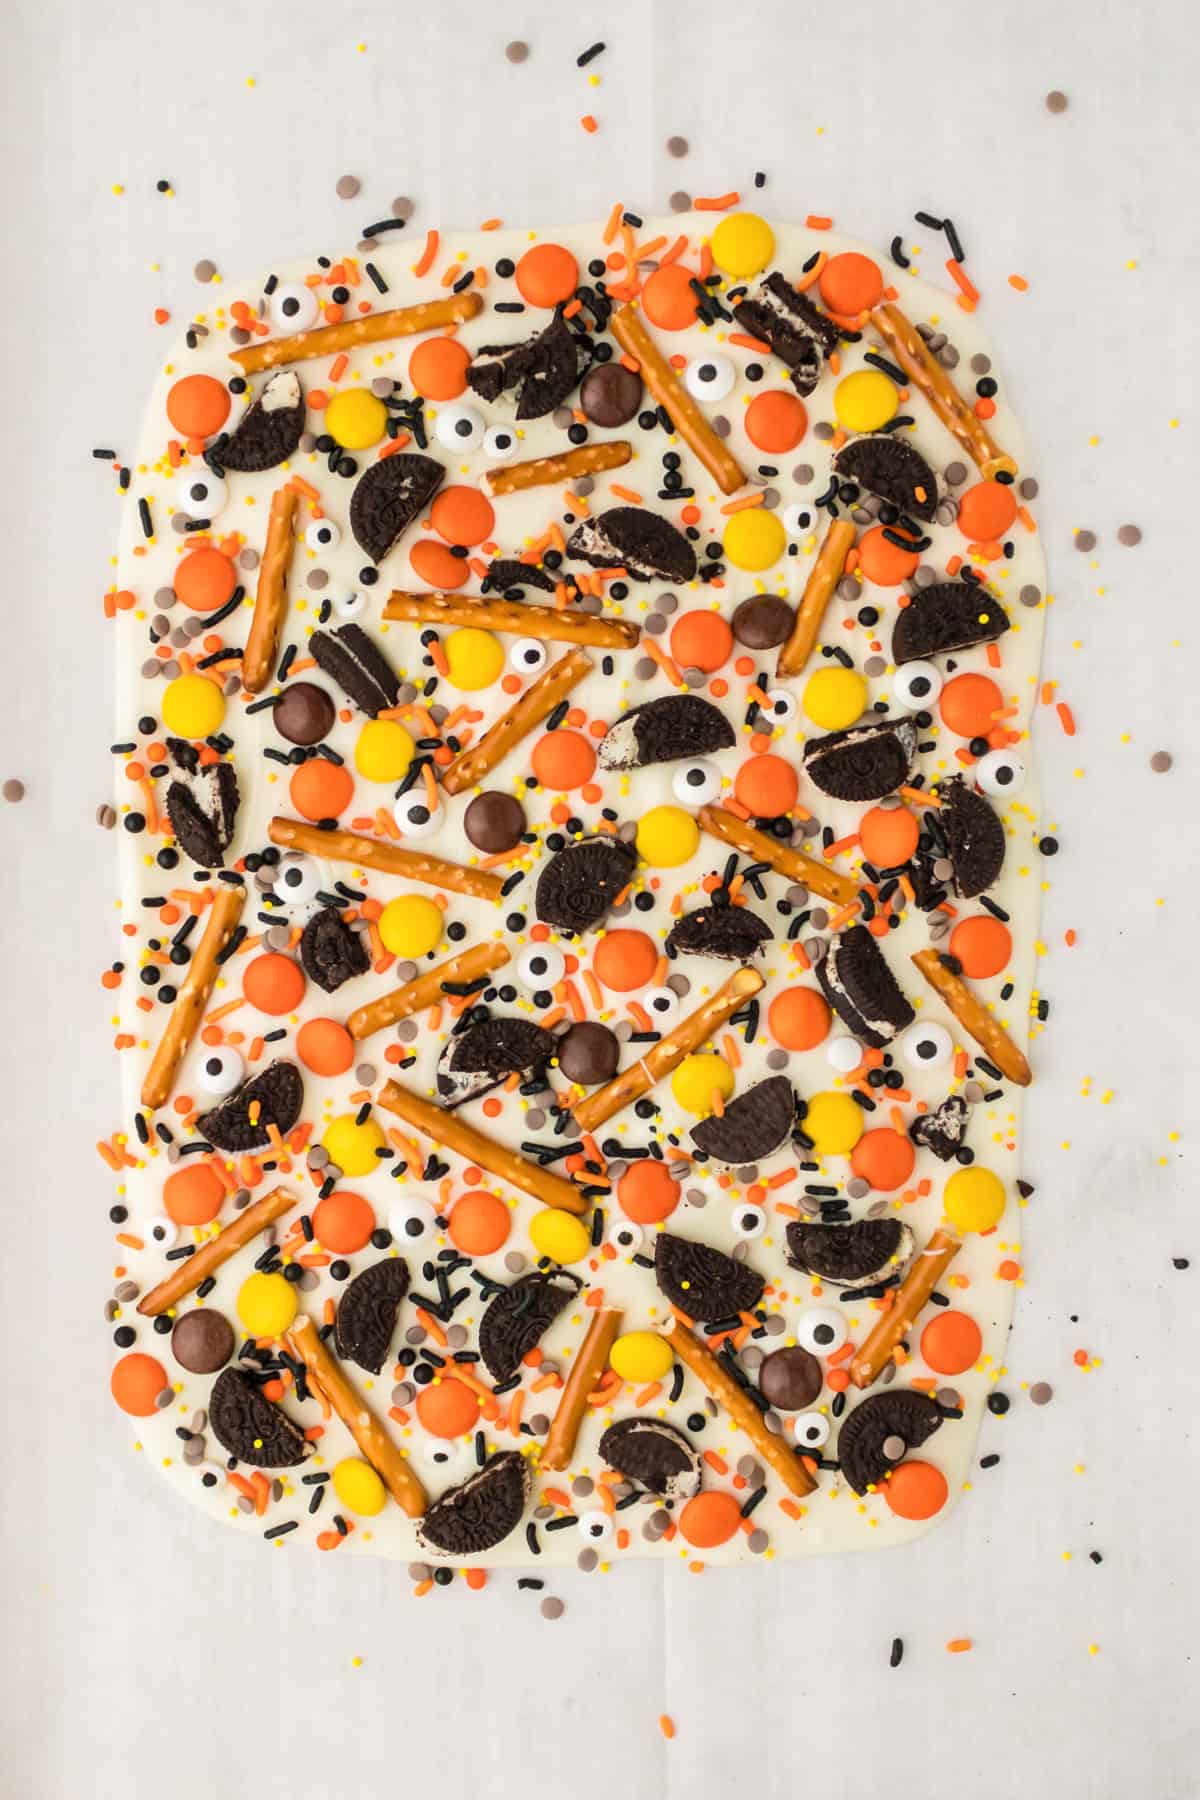 Bark with sprinkles and candy eyes added.